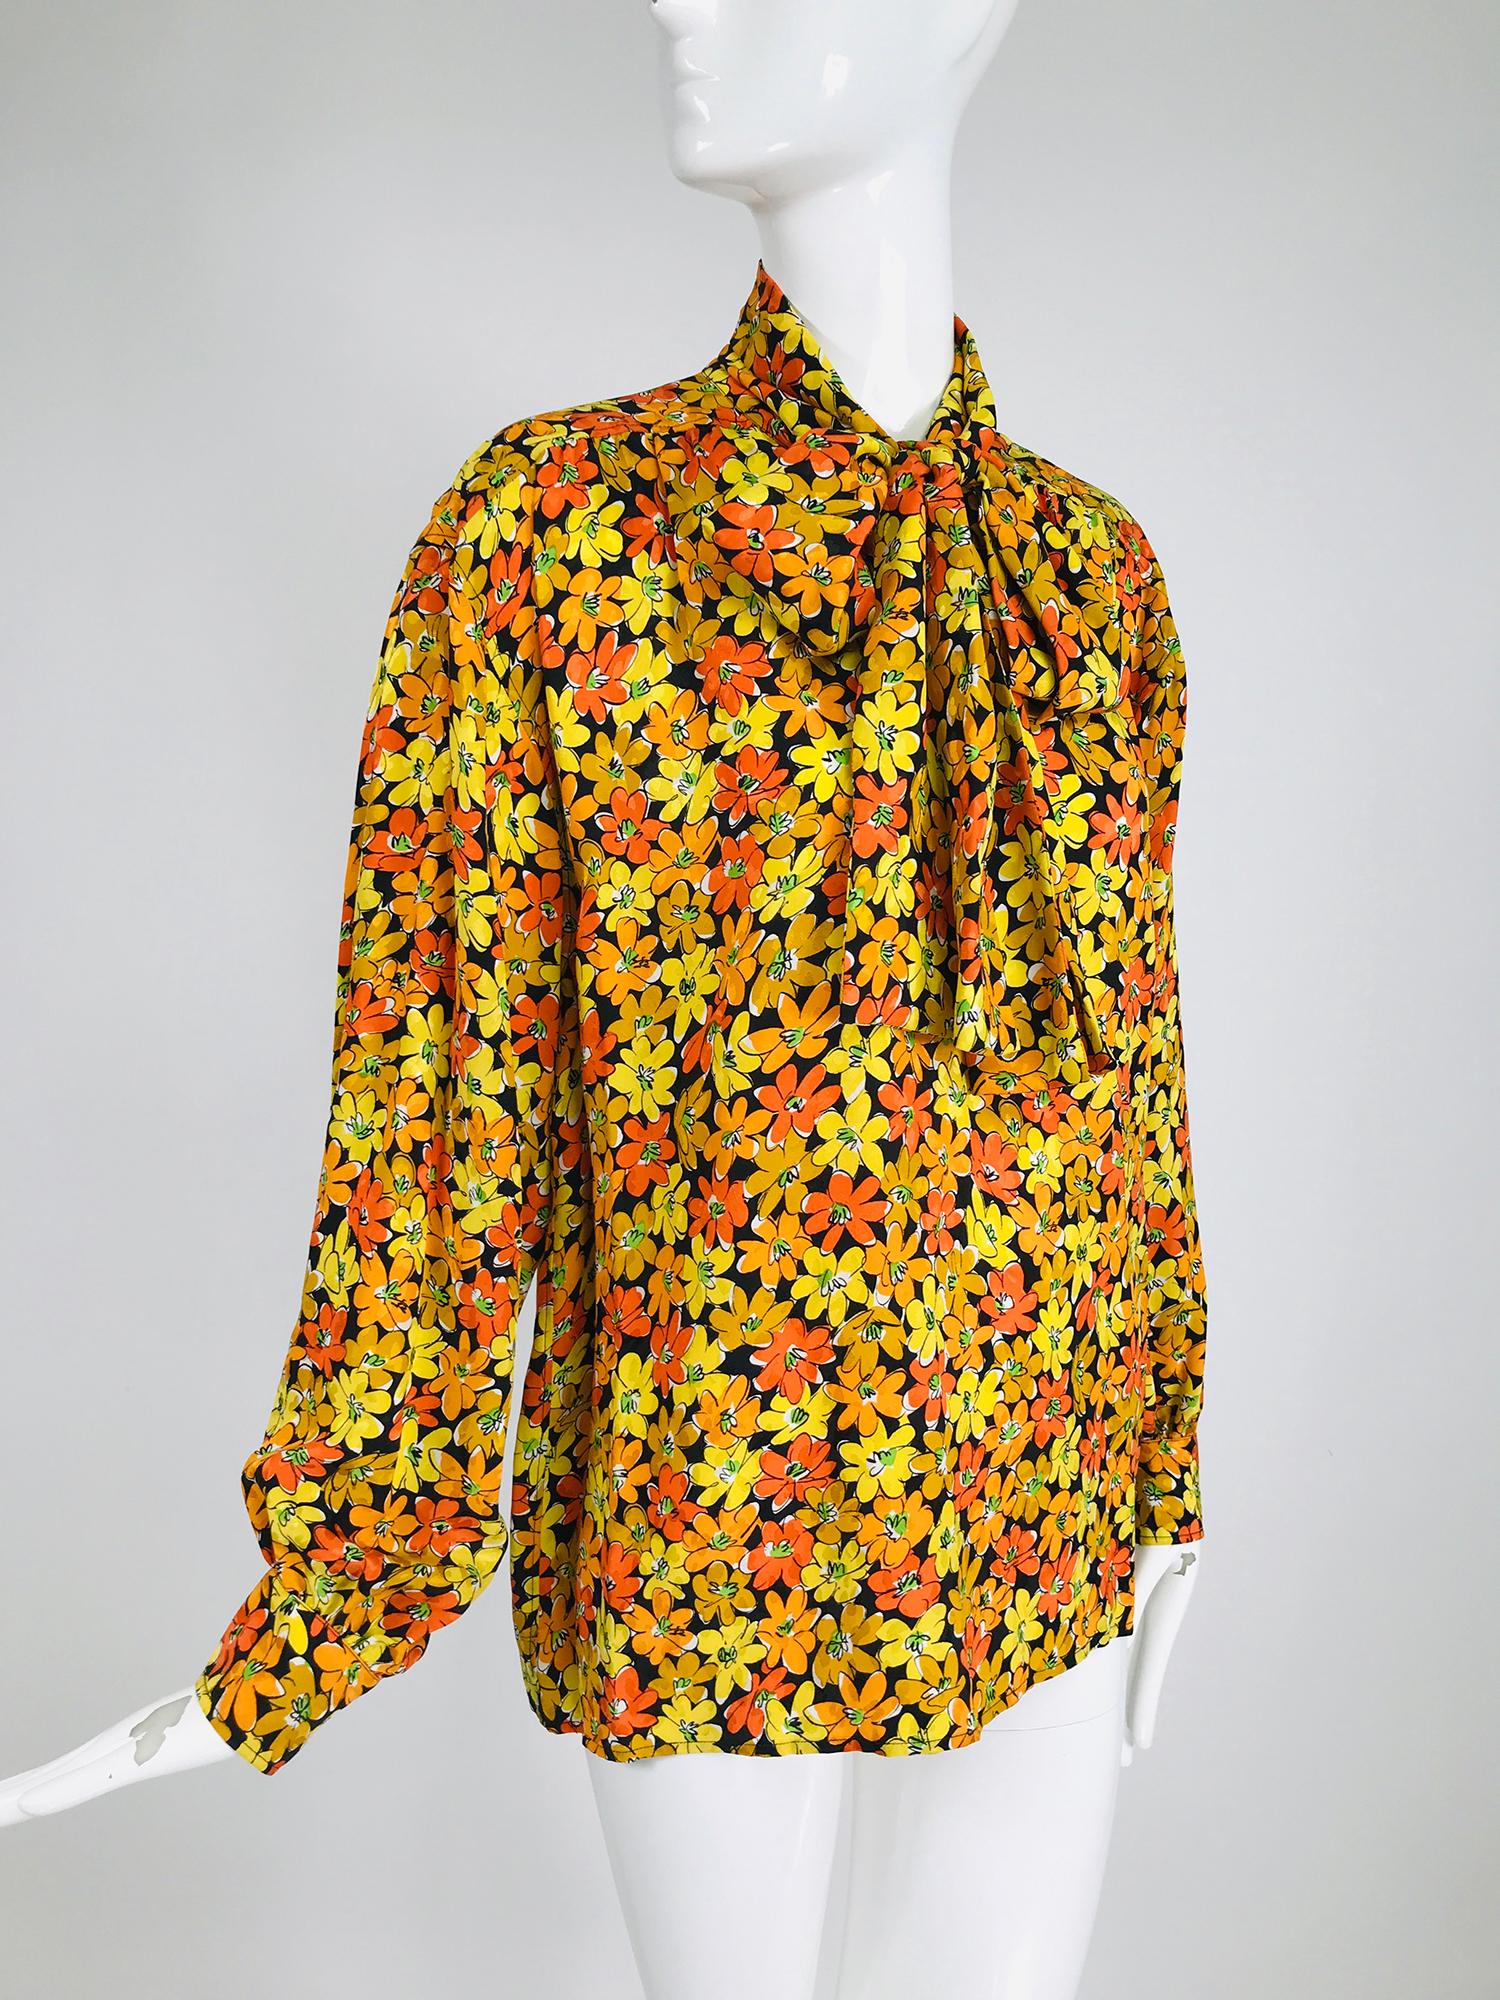 Vintage Yves Saint Laurent Rive Gauche vibrant floral silk print bow tie blouse. This beautiful silk blouse looks barely, if ever, worn. The print is bright and cheery. Pull on blouse has a button to the middle placket with attached ties at the